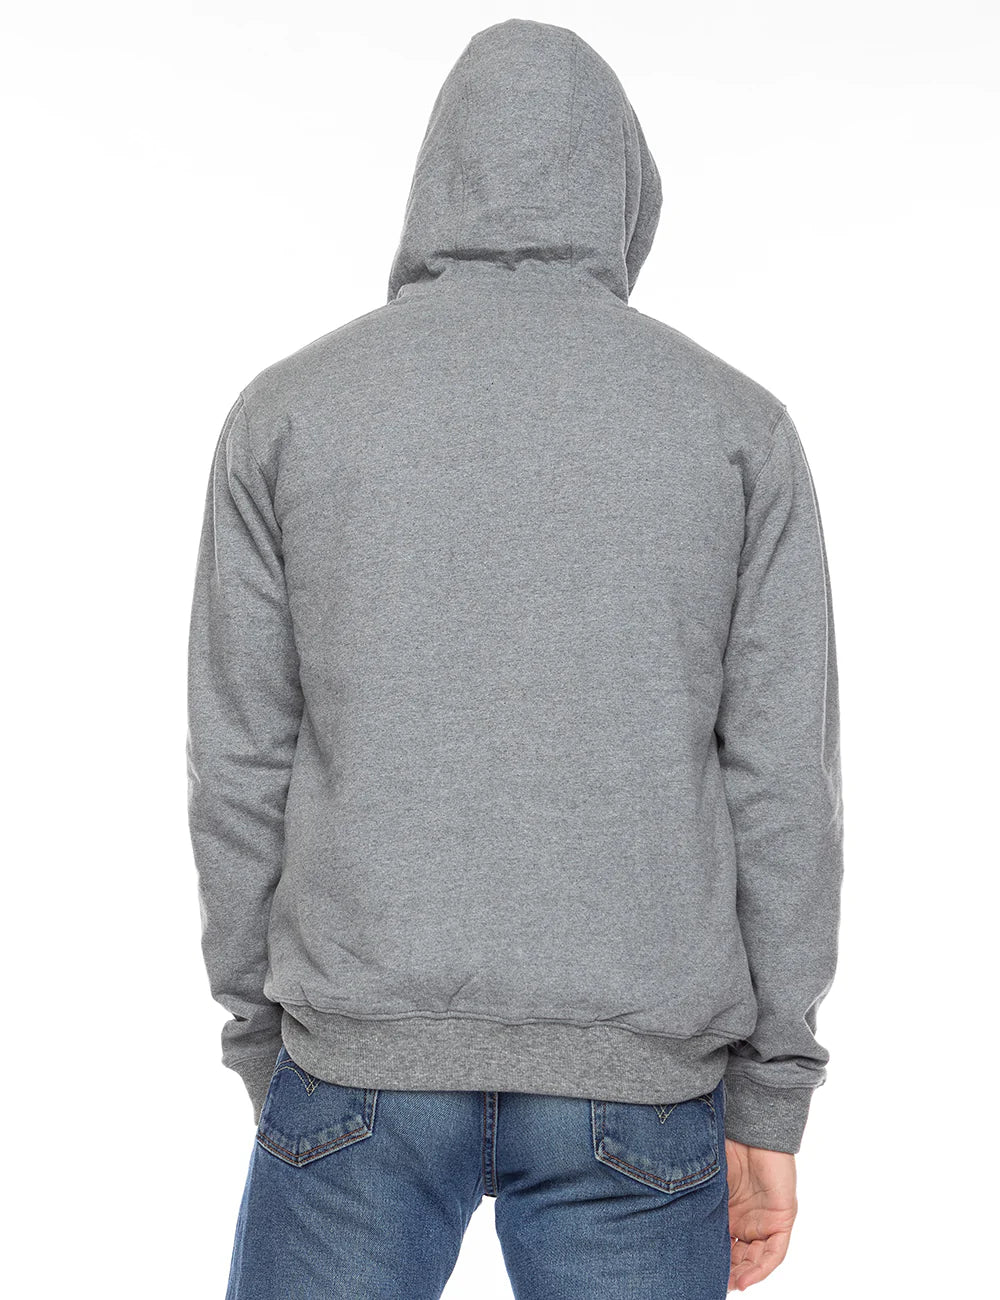 An easy-fitting hoodie& bursting with sherpa inside - even the hood has fluff!